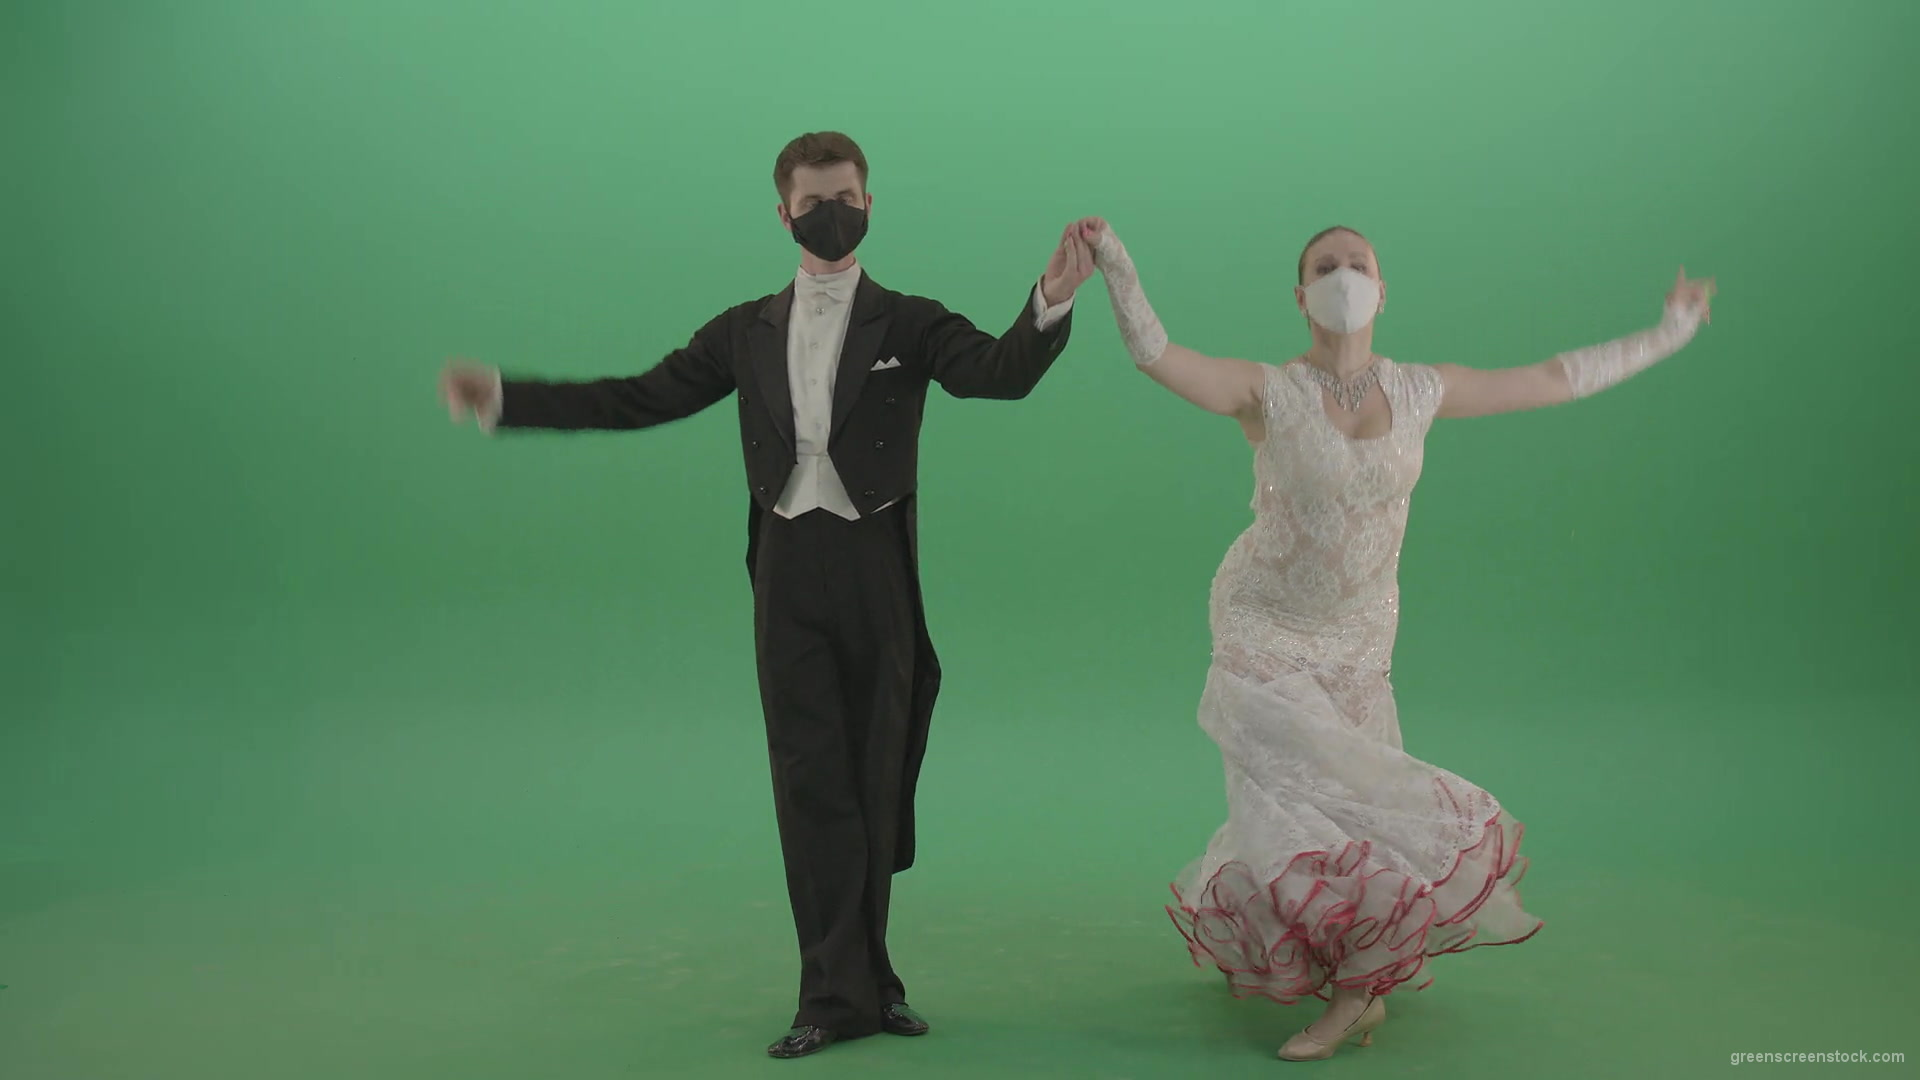 Ballroom-Dancers-Man-and-Woman-making-bowing-regards-and-welcome-Corona-Virus-on-green-screen-4K-Video-Footage-1920_008 Green Screen Stock